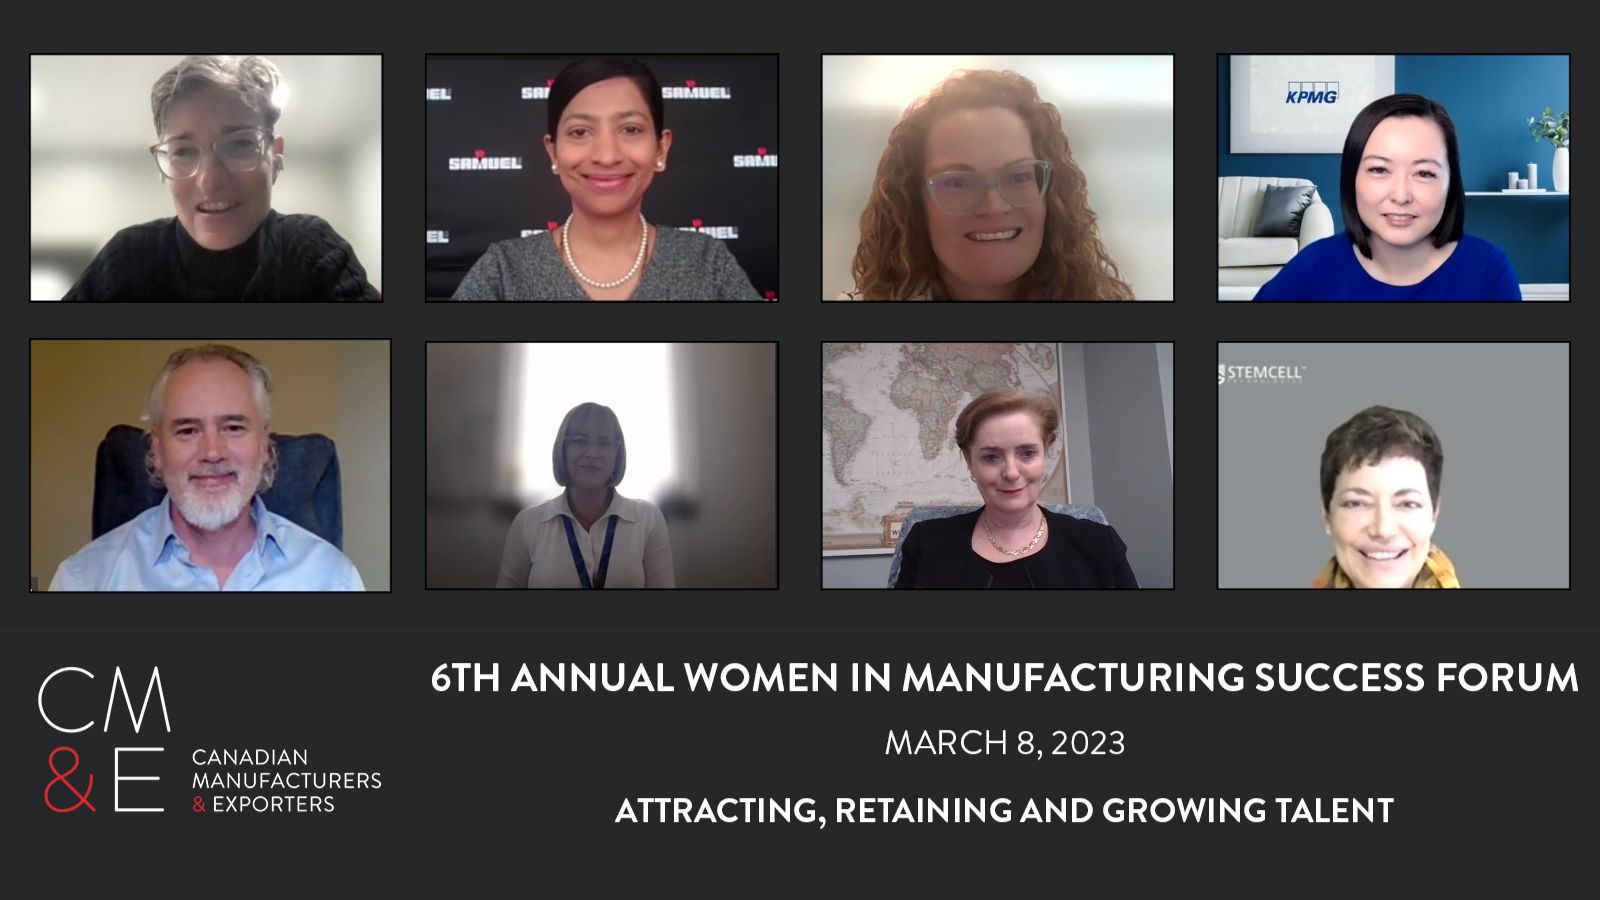 Women at Samuel speaking at Industry events